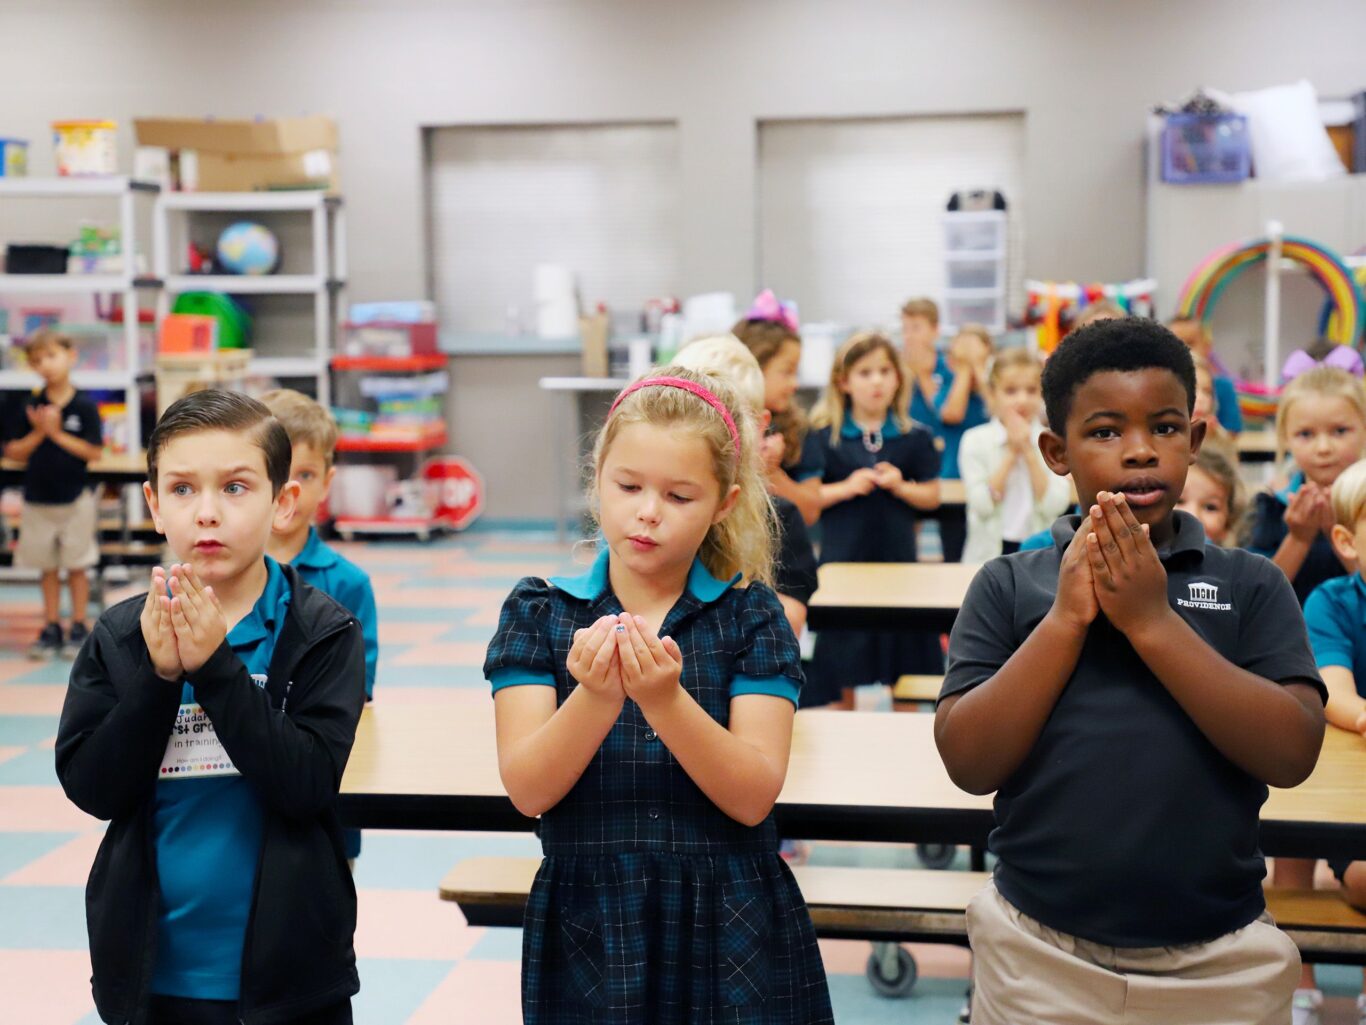 A crowd of children clapping in a classroom.